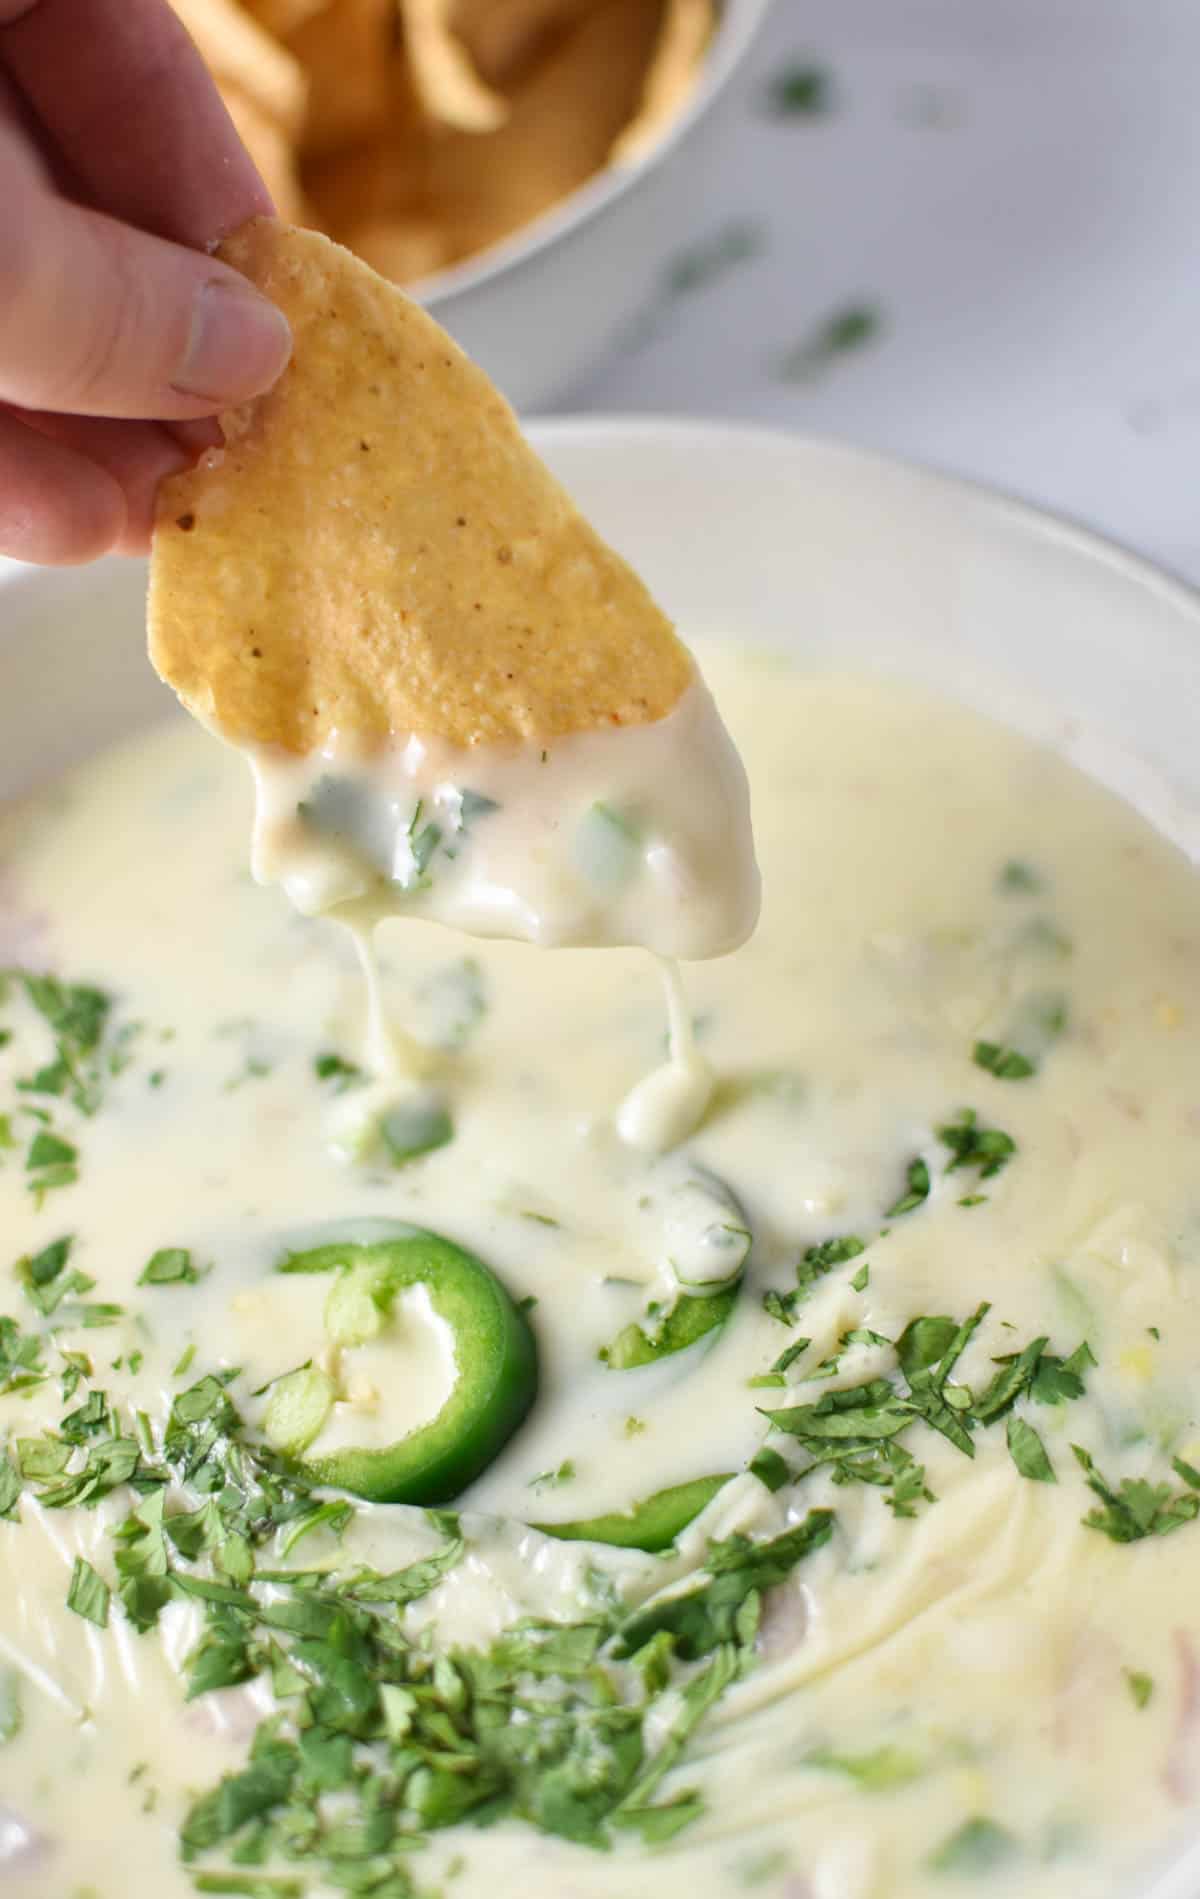 A hand dipping a tortilla chip into a bowl of creamy queso.